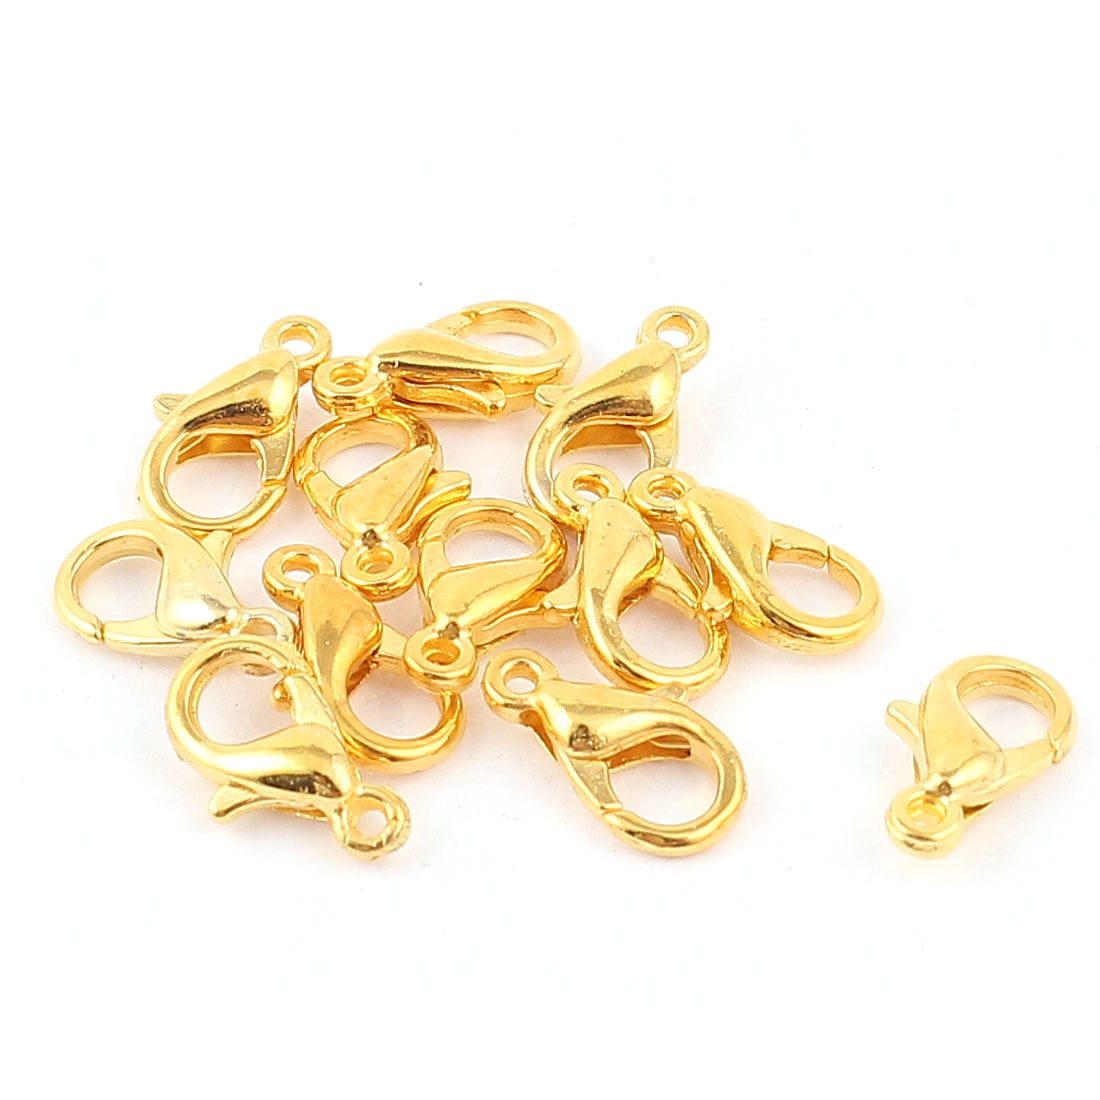 Jewelry Fastener Hooks Findings Lobster Clasps Clips Claw Gold Tone ...